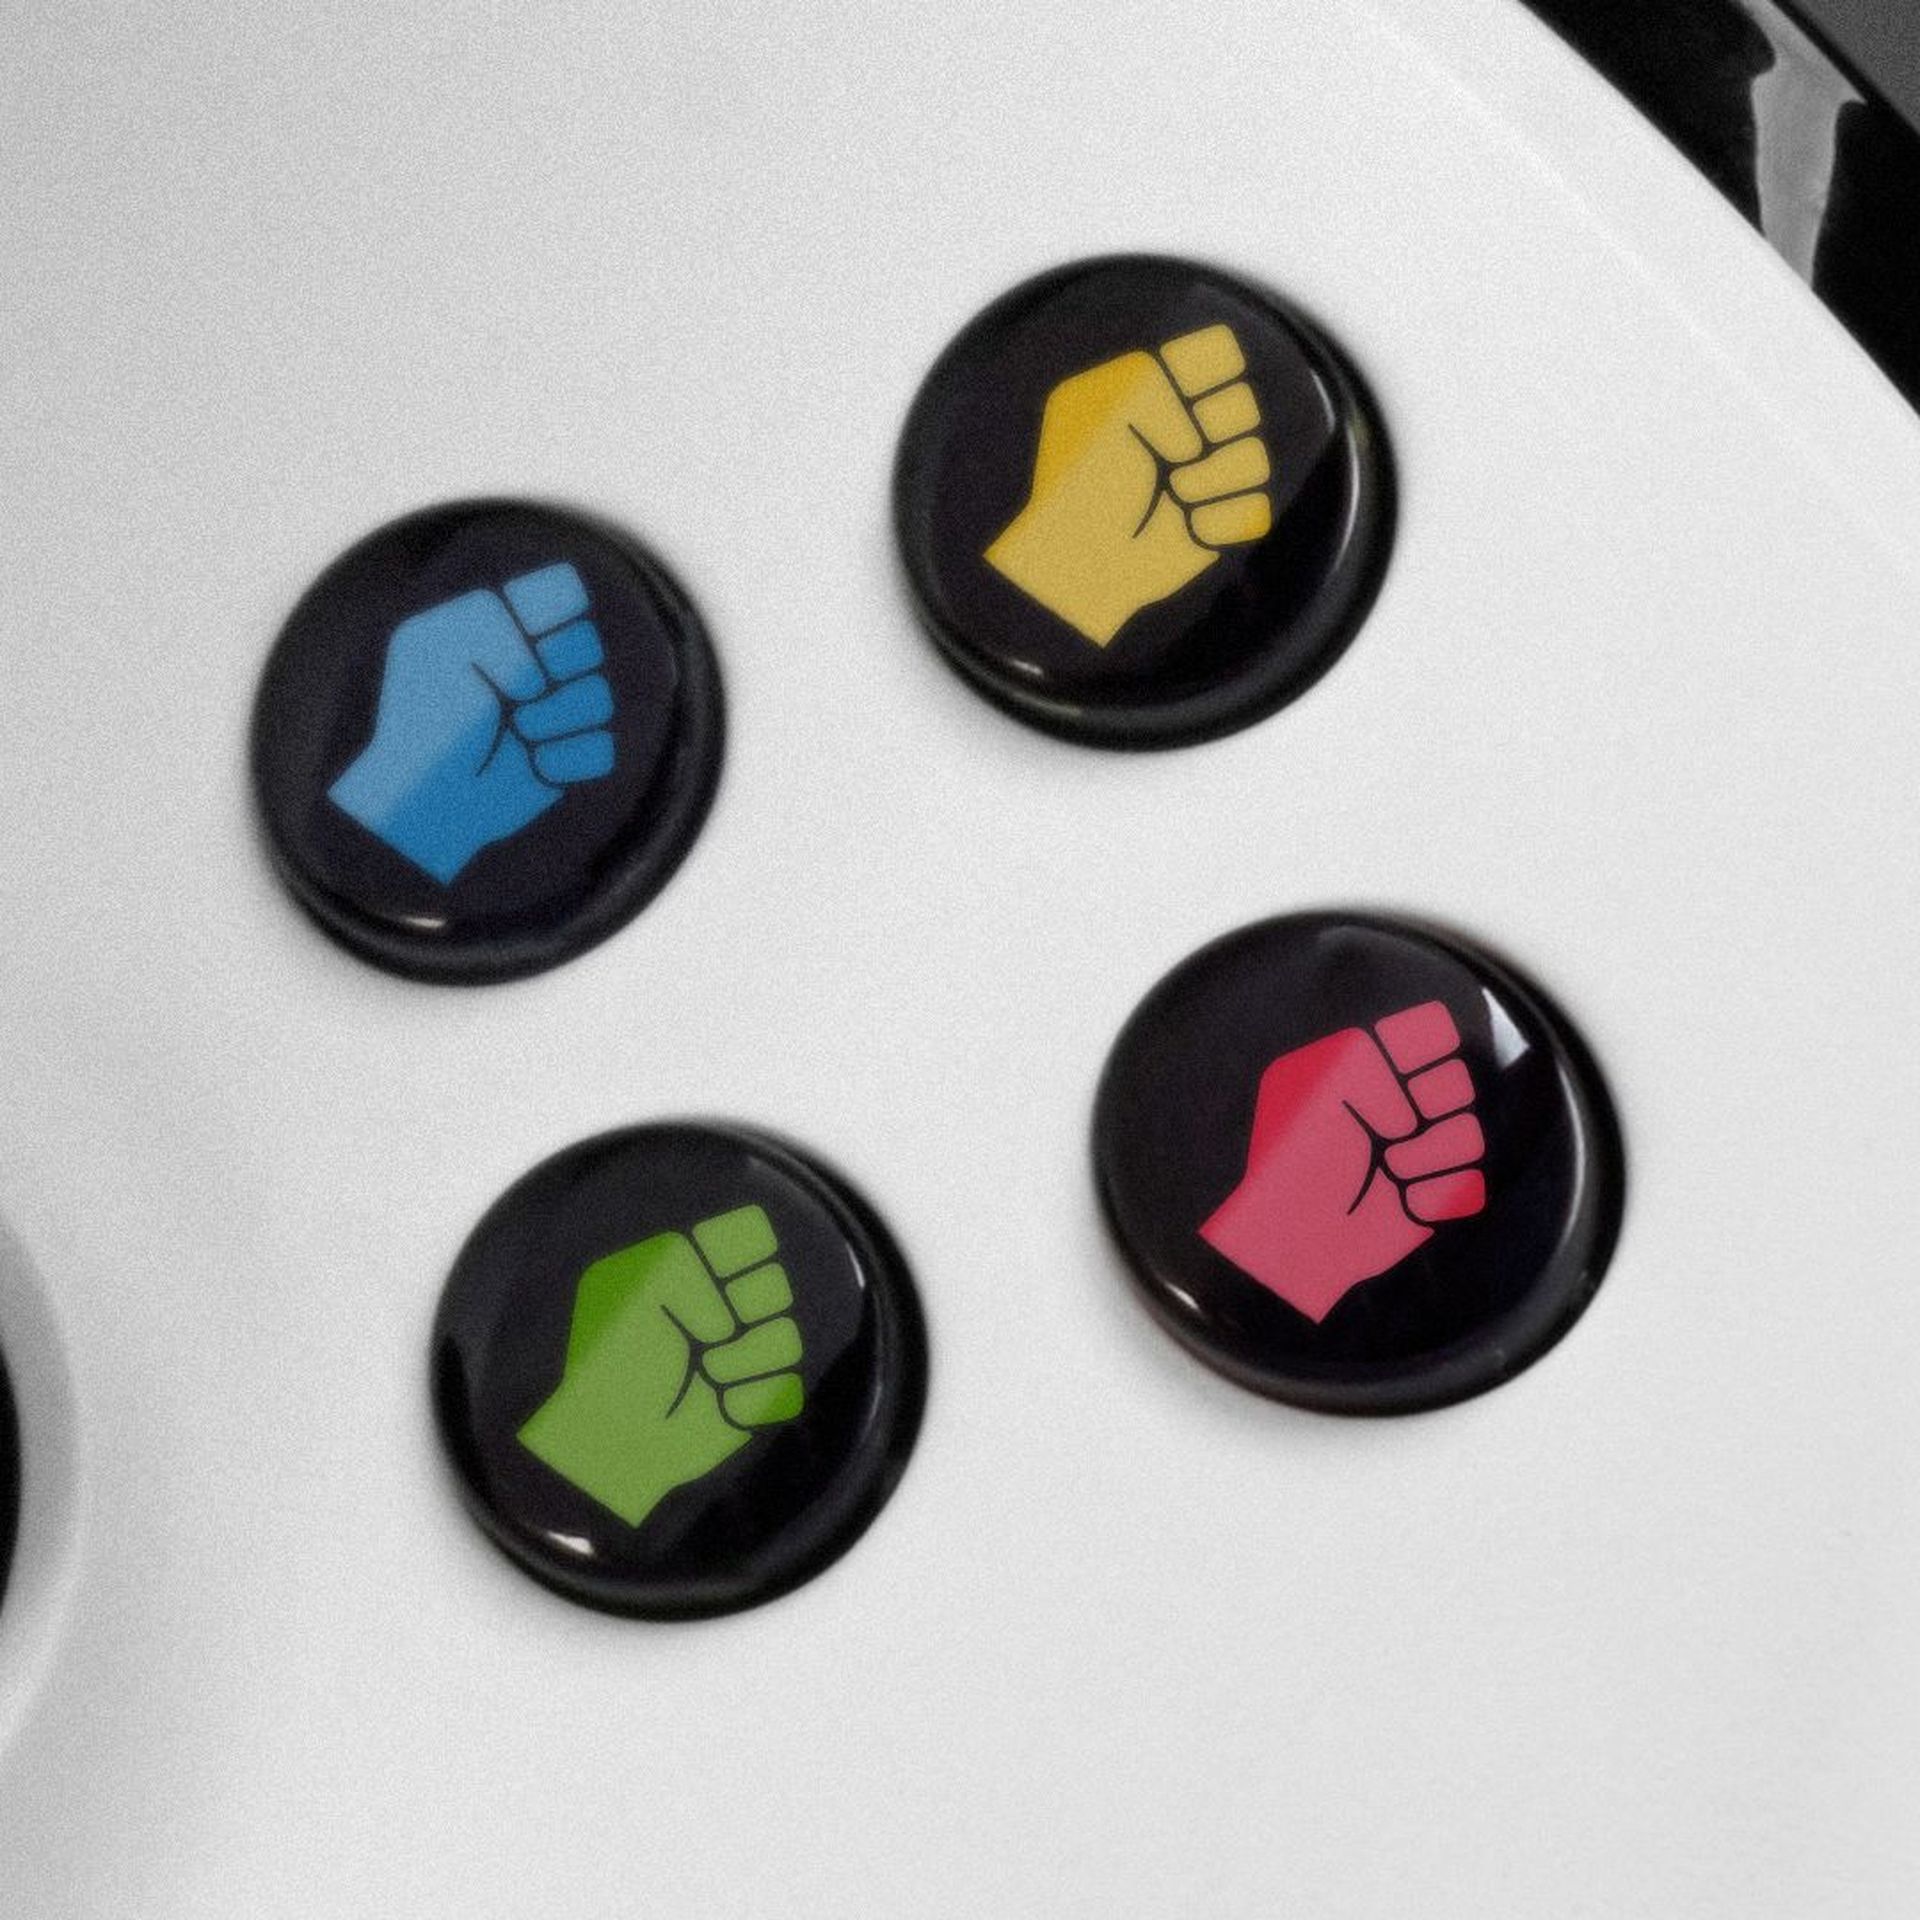 Illustration of a gaming controller with different fist icons on the buttons. 